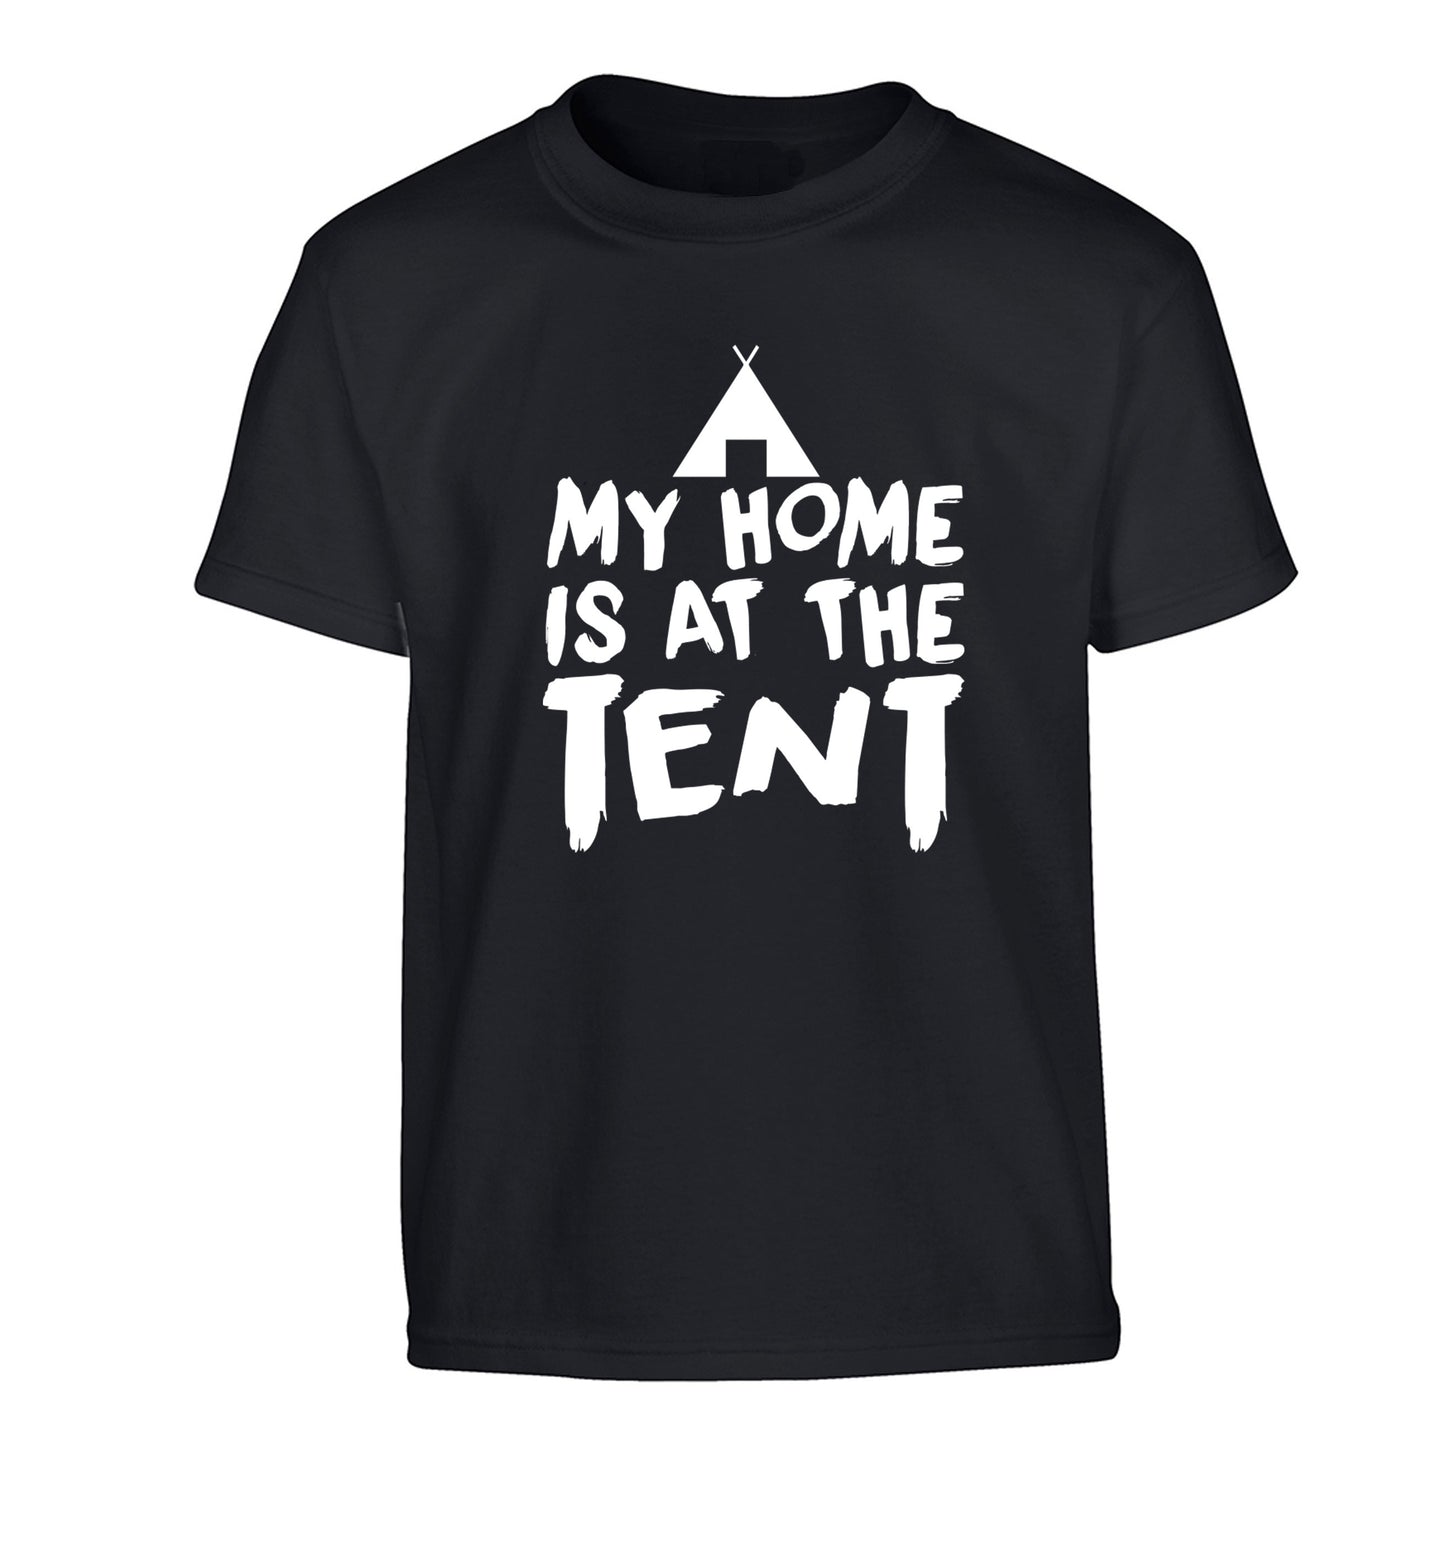 My home is at the tent Children's black Tshirt 12-14 Years